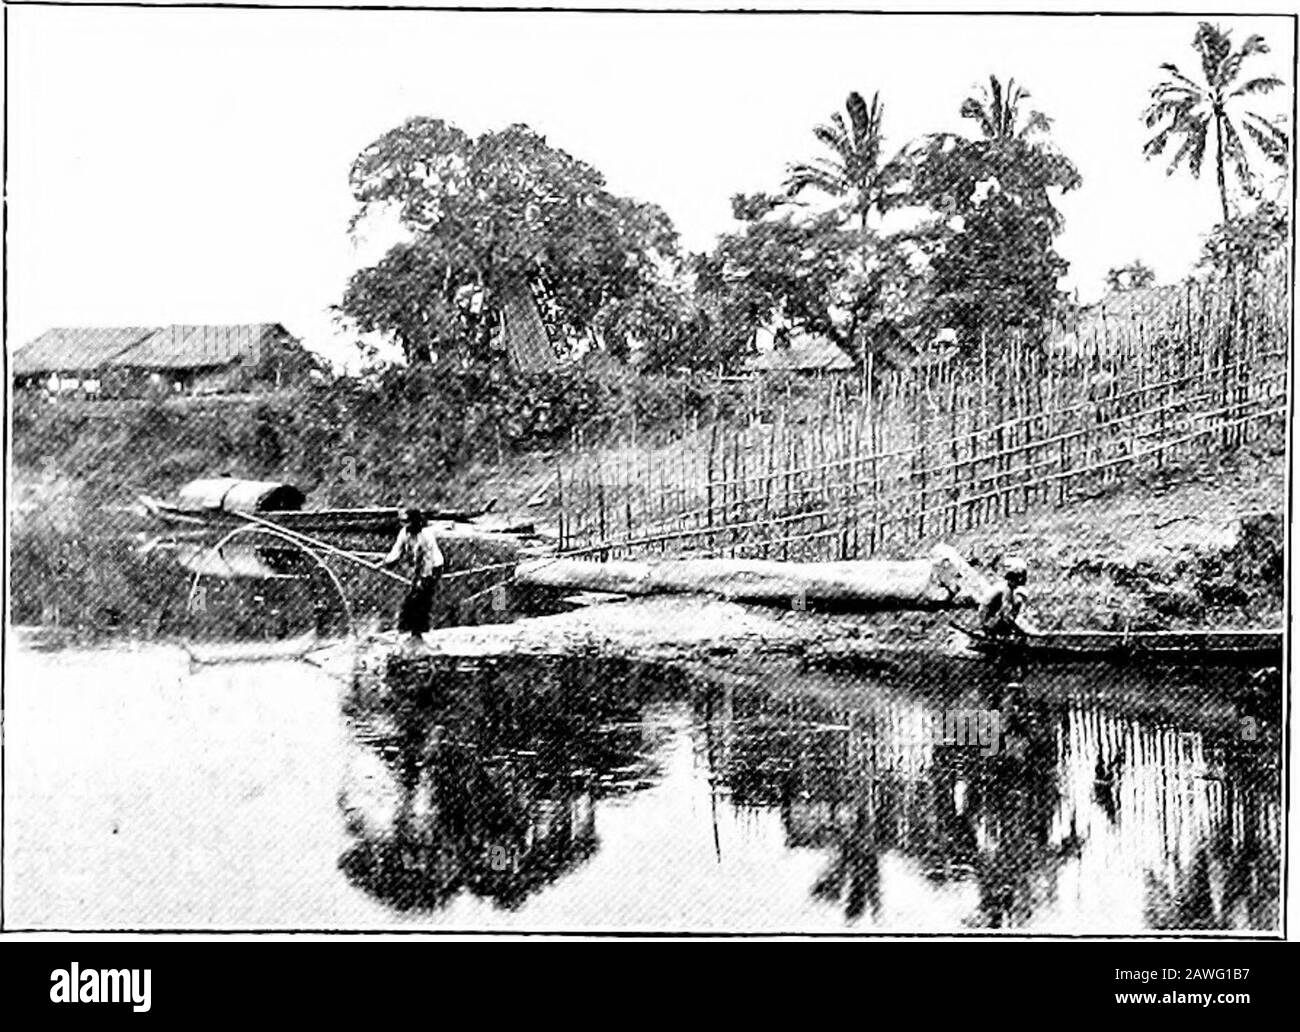 Burma . 88 BURMA. 191. SWING NET (YAQWIN). jack and several other fruits areroasted and eaten. Vegetablesare regularly cultivated in thevicinity of large towns. In thevillages very little trouble istaken with them. A bush orso of capsicum and a fewplants of brinjal or tomato areset; pumpkins and gourds aretrained over the roof or onarbours in front (Nos. 126,414).The market vegetables areonions and garlic, many kindsof beans, fresh and dried,various tubers, yams, sweet-potato, pumpkins, marrows, gourds, brinjalsand tomatoes, chimbdung, kyeppaung and kyemmaiik. Green maize is used asa vegetable Stock Photo